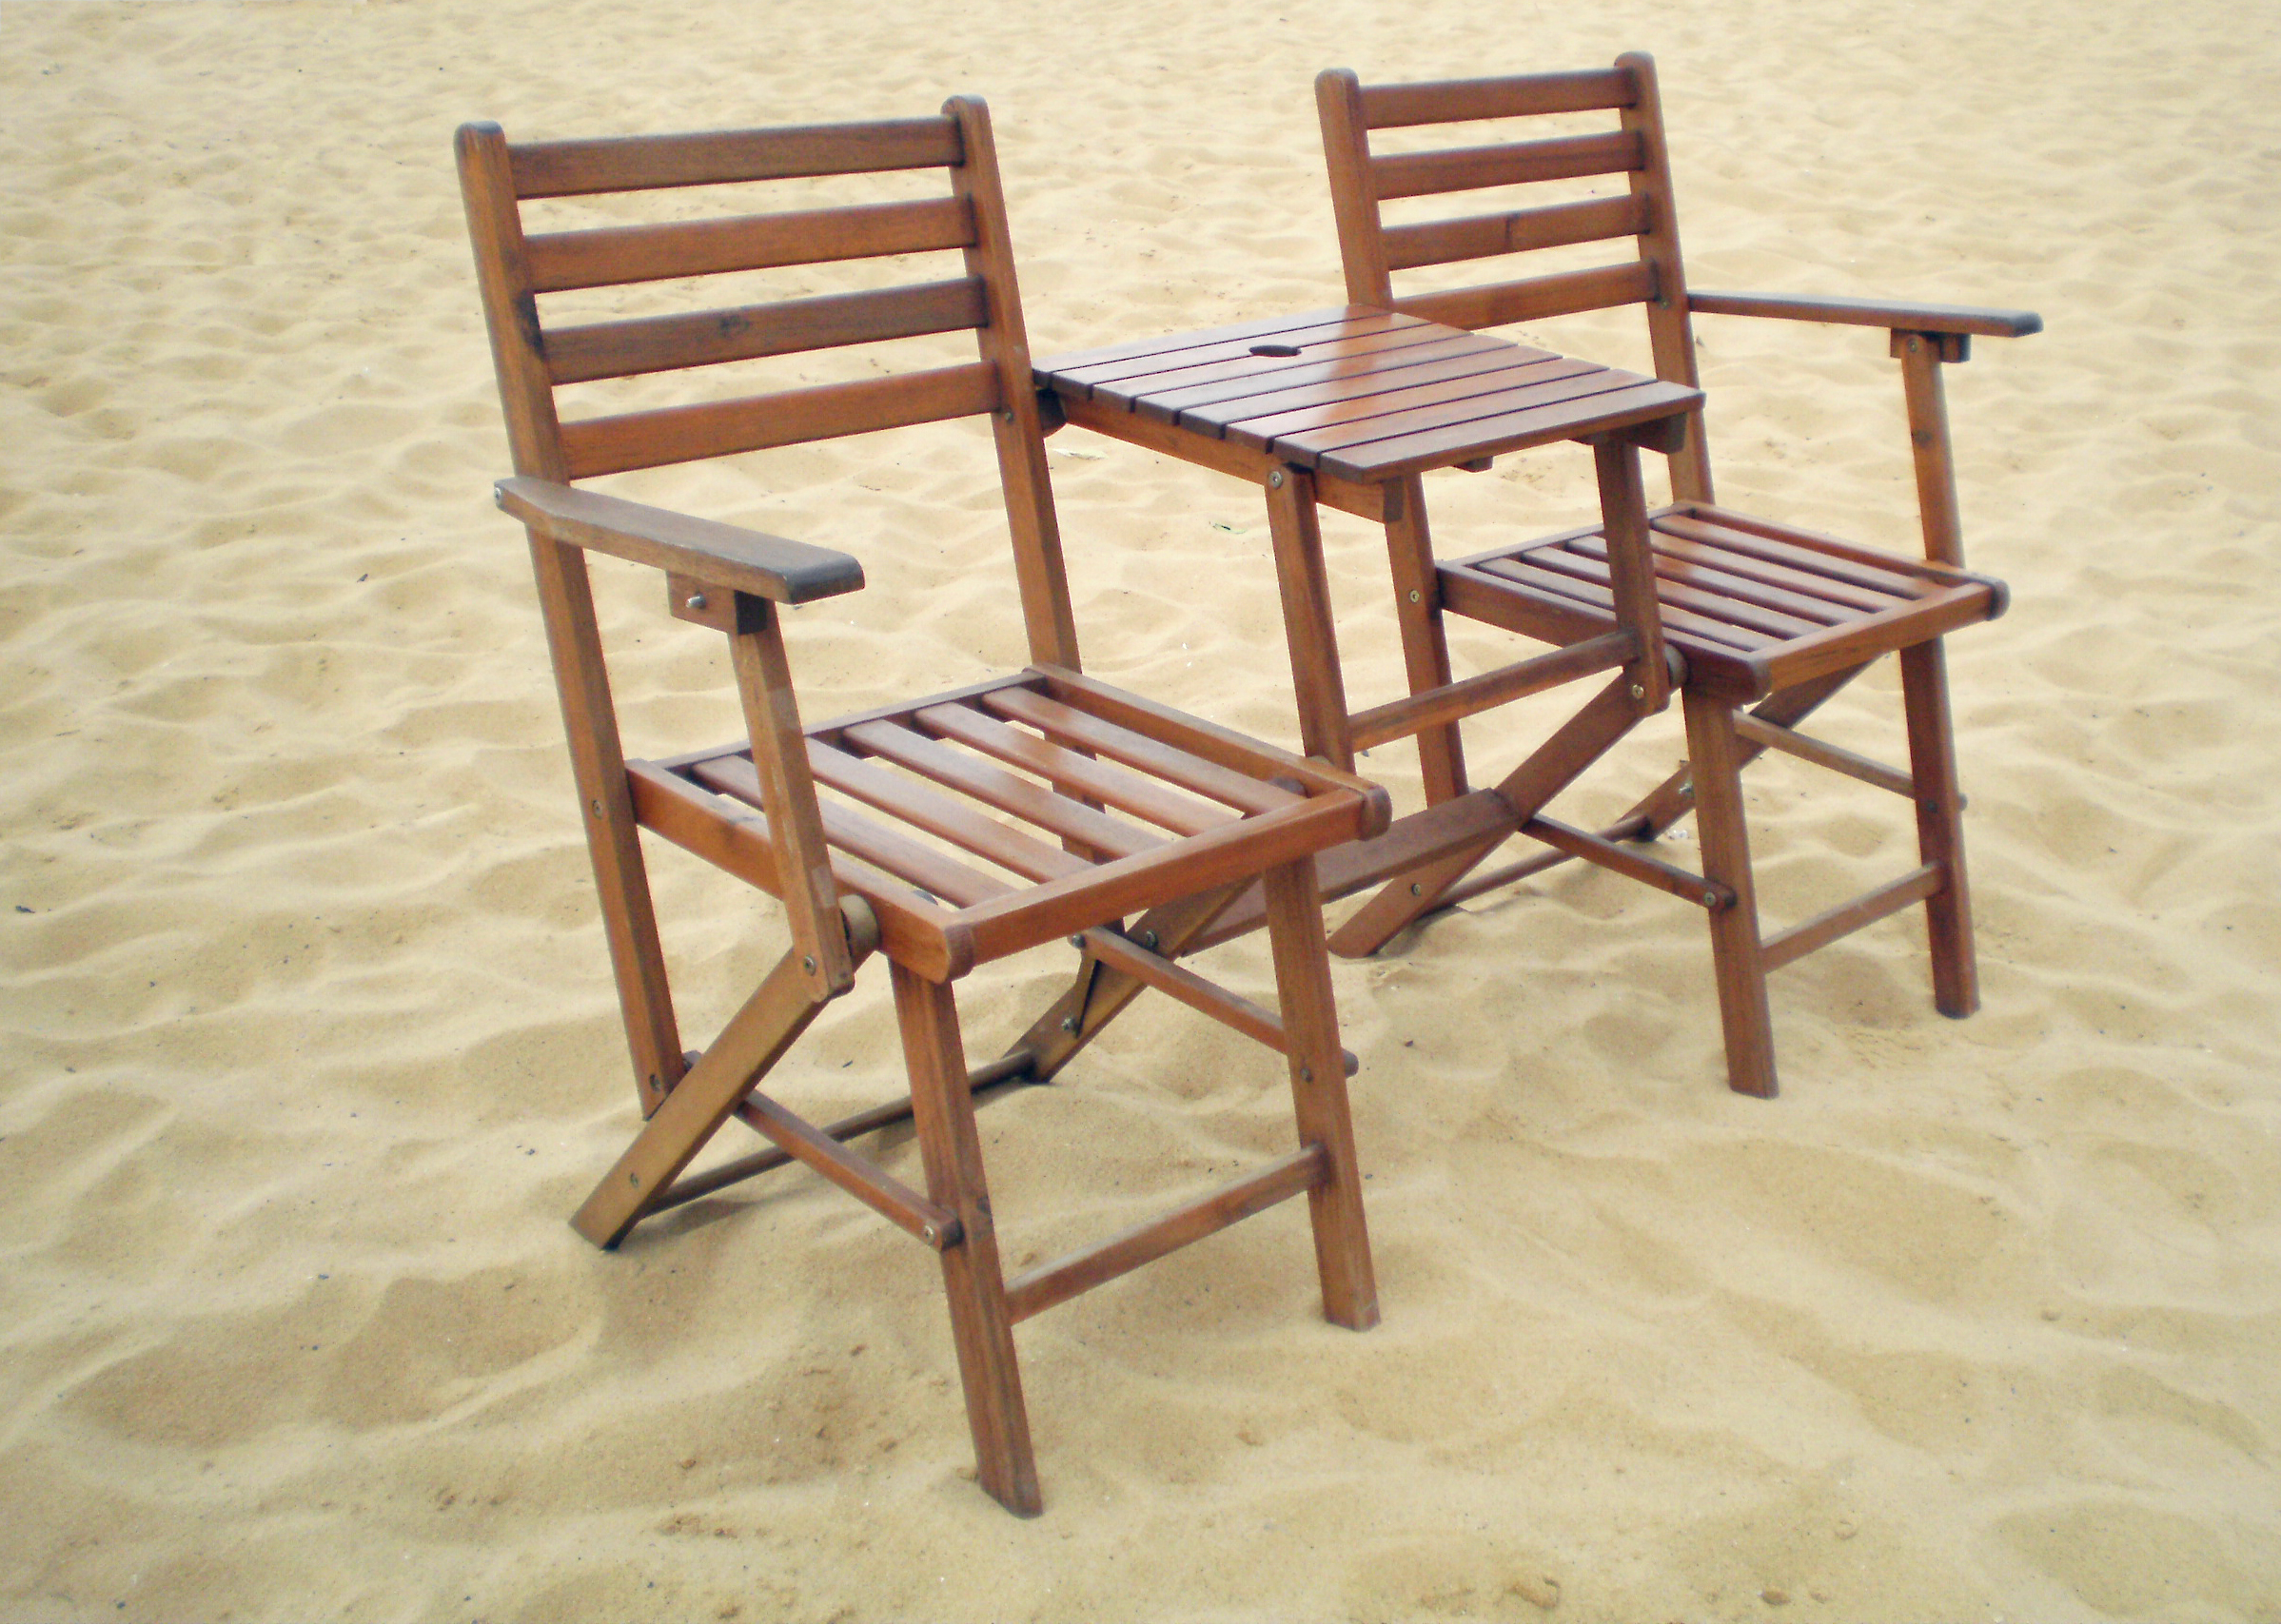 A&B Home Folding Attached Chairs and Table - image 1 of 2